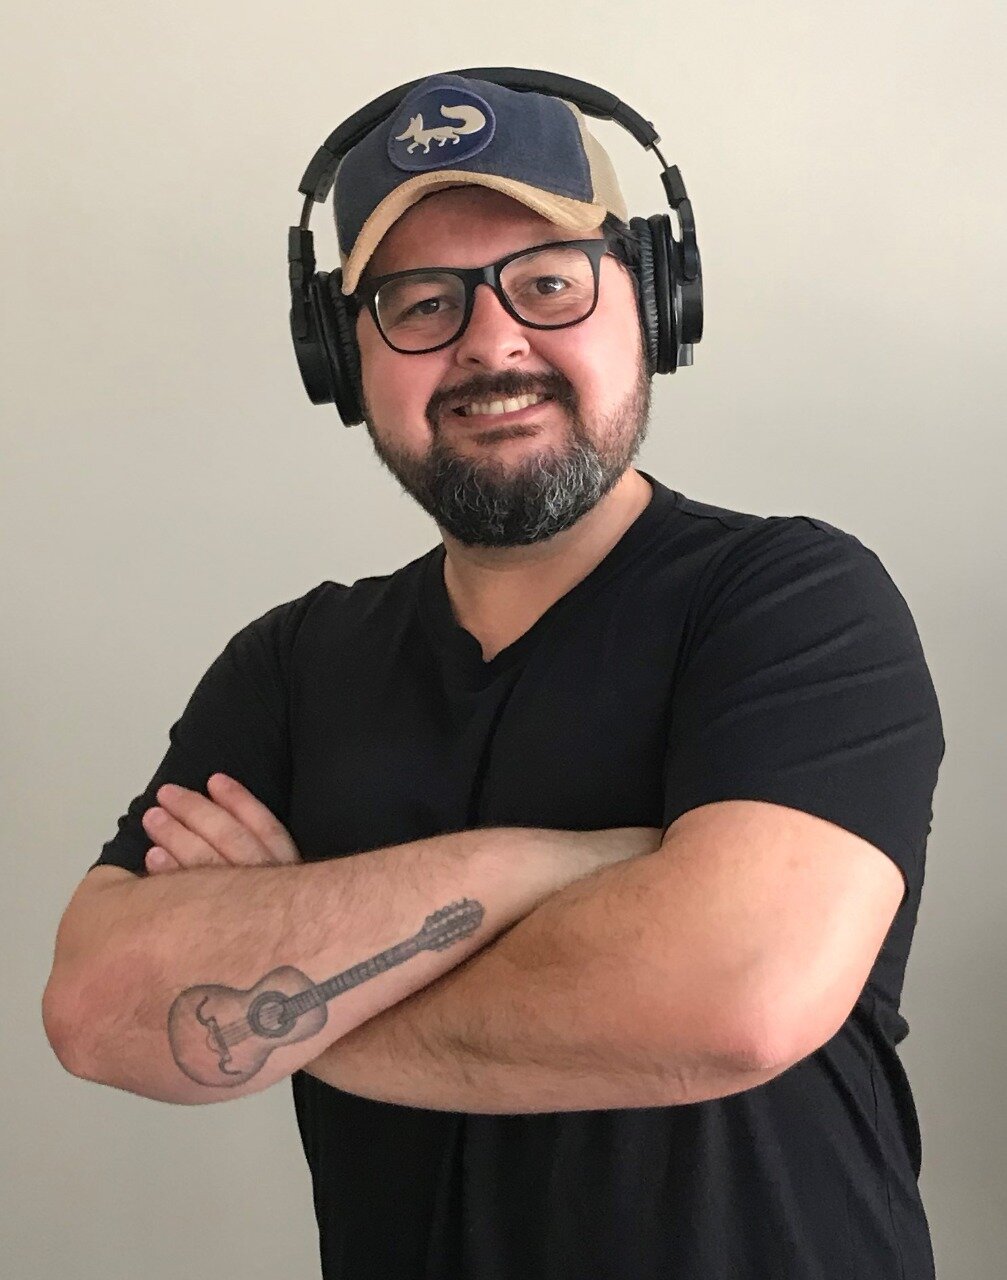 An Interview with Luiz Borges of the Podcast Cachaça Prosa e Viola